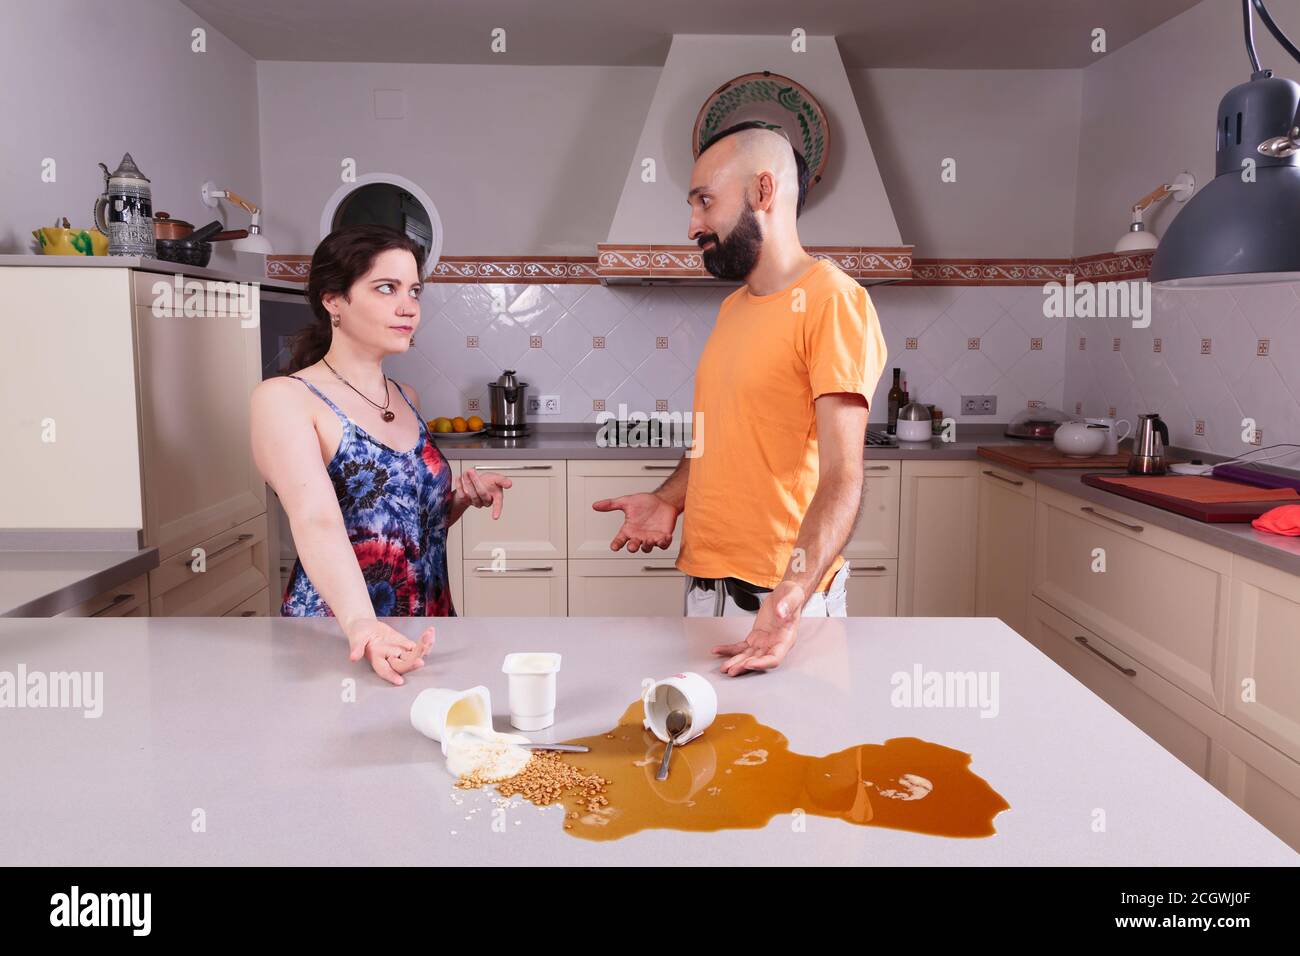 Hispanic couple arguing about the dirty kitchen counter Stock Photo